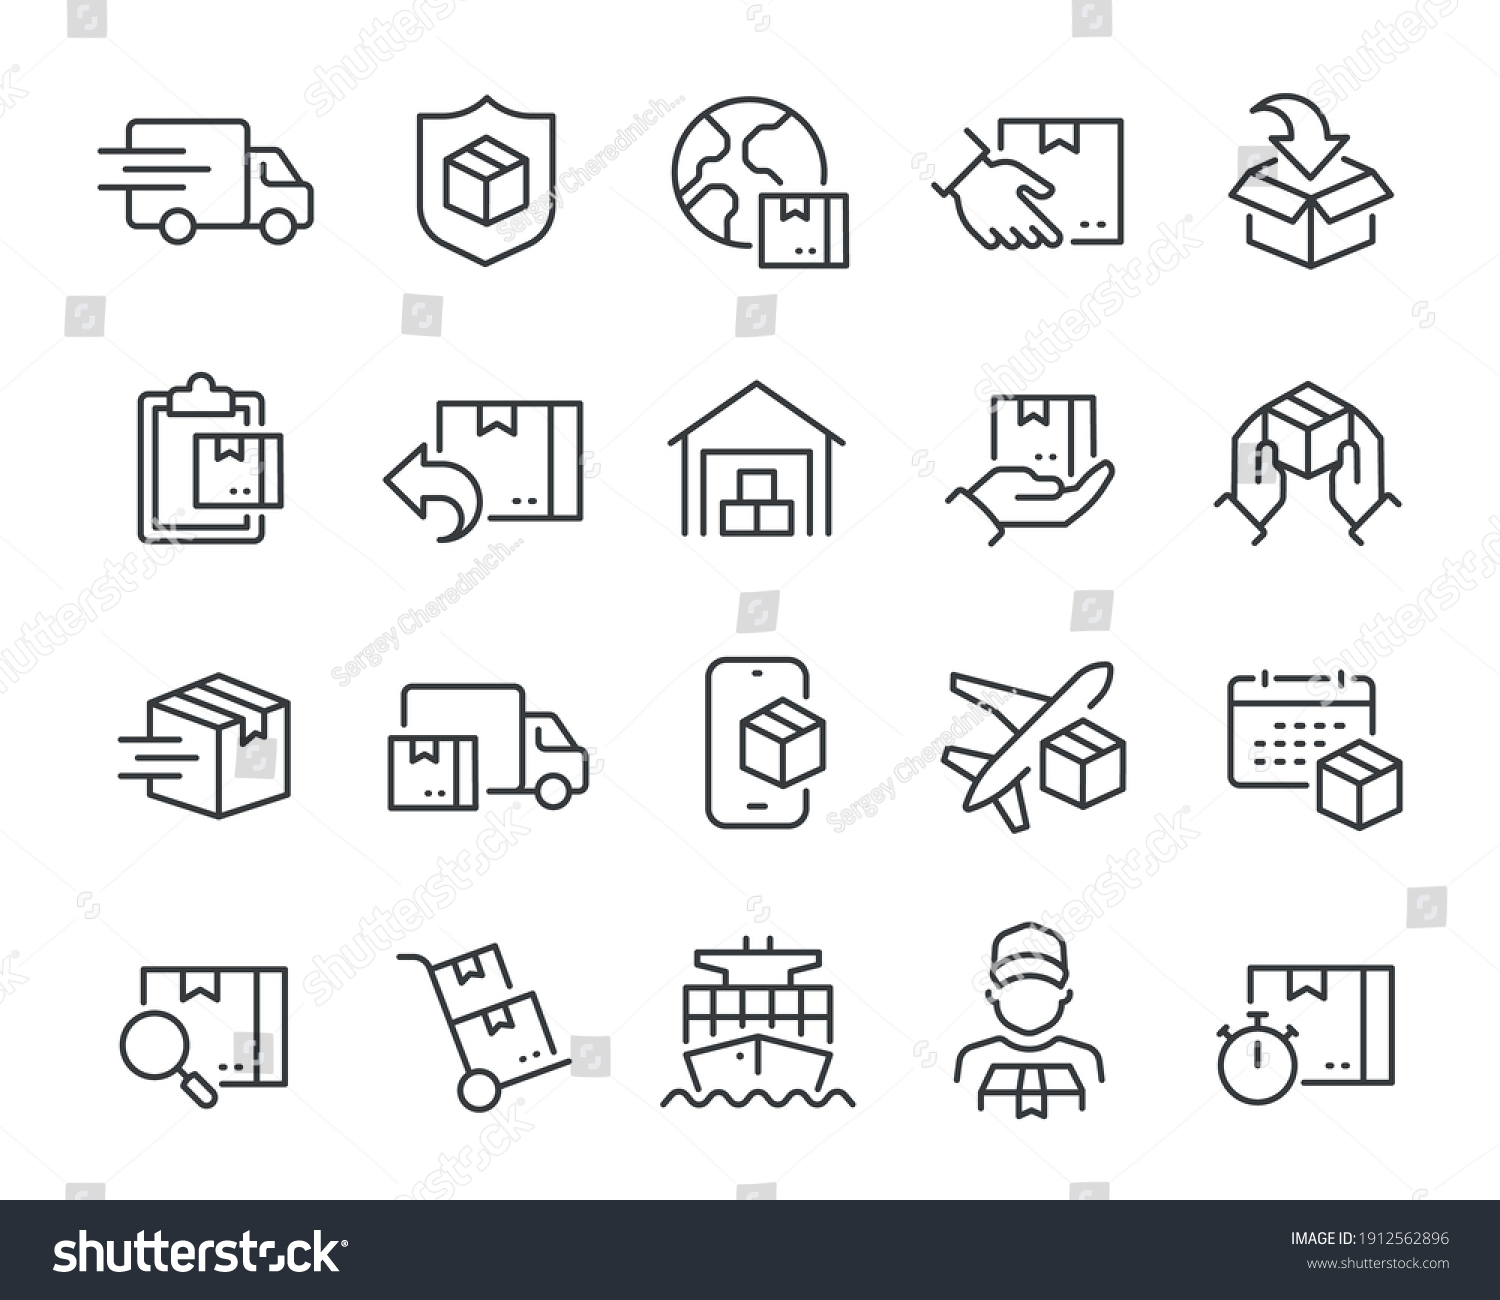 Delivery icons set. Collection of simple linear web icons such as Shipping By Sea Air, Delivery Date, Courier, Warehouse, Return Search Parcel, Fast Shipping and others Editable vector stroke. #1912562896